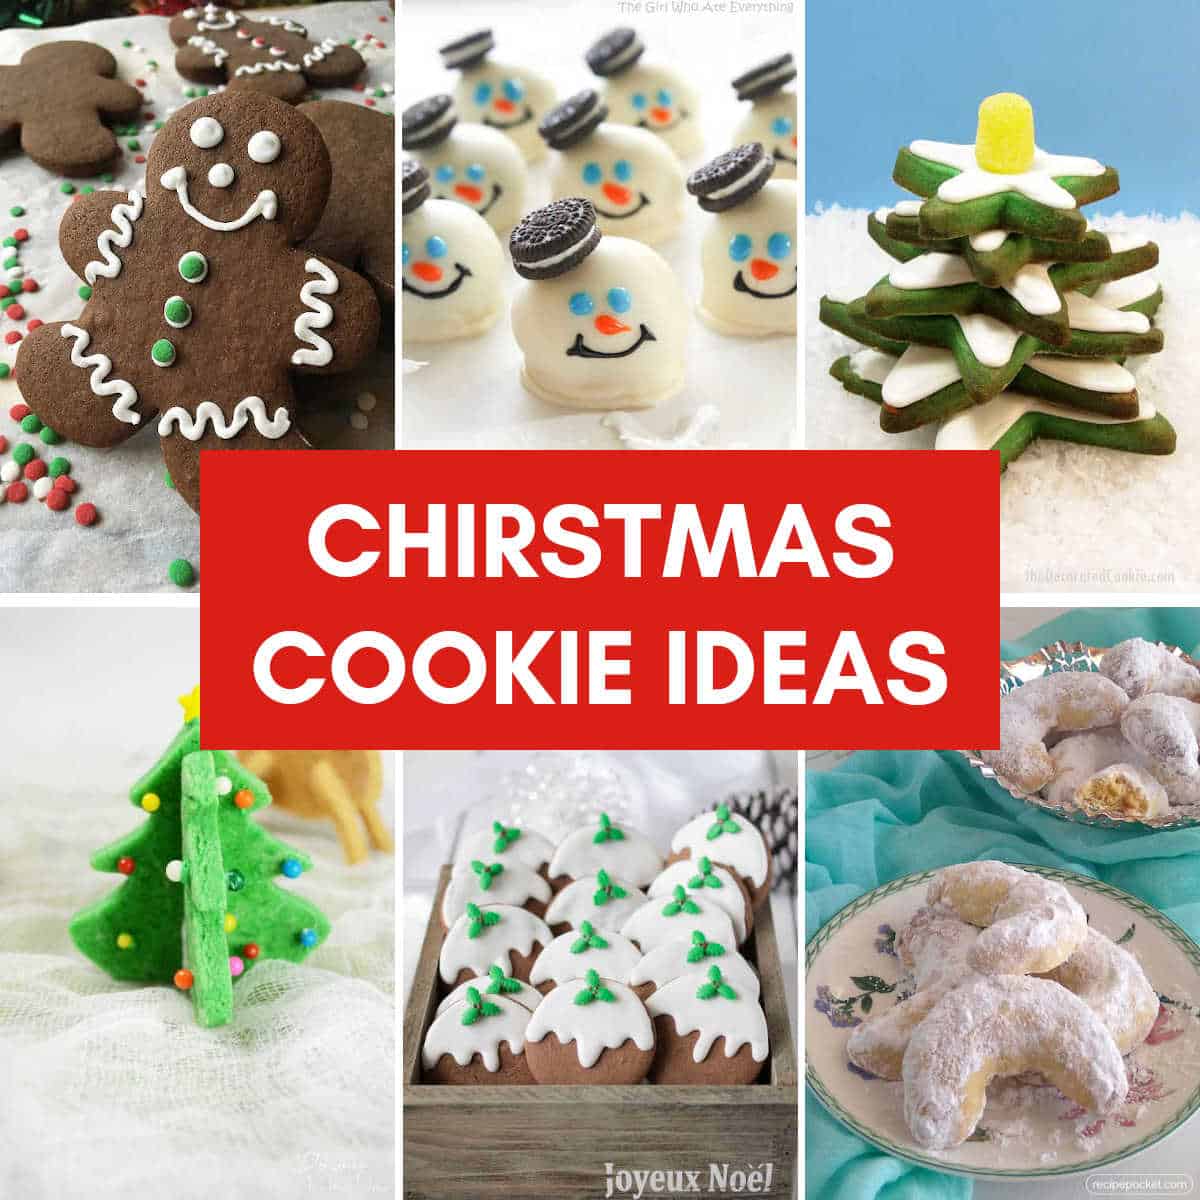 A collage showing different cookie ideas for Christmas.